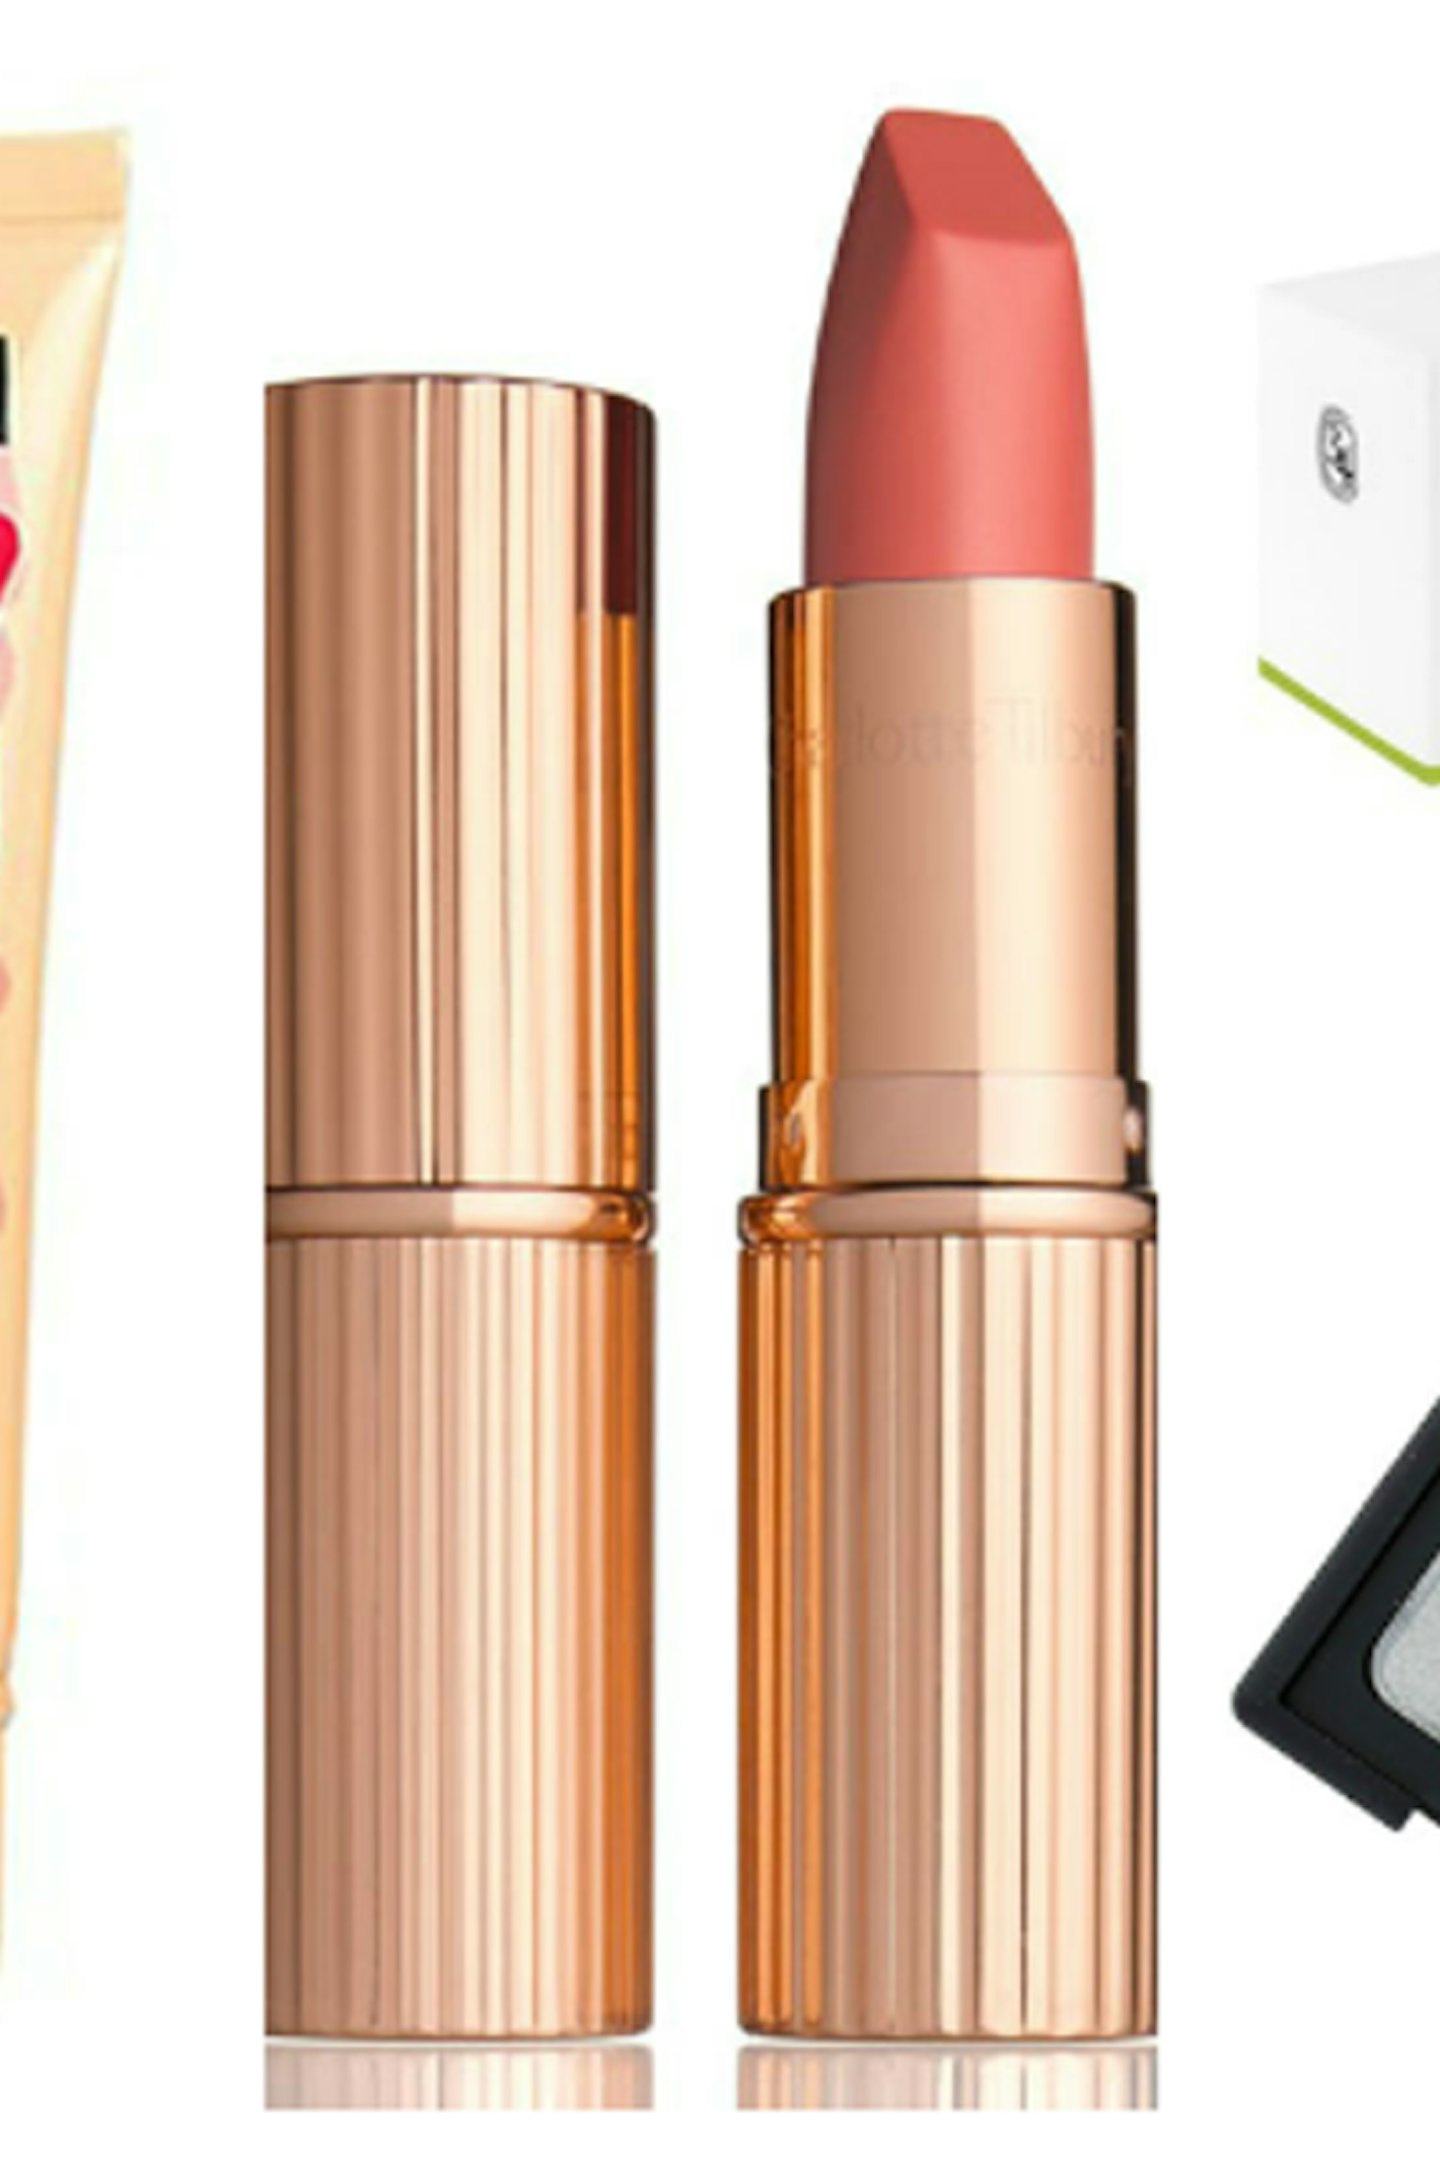 GALLERY>> THE BEAUTY PRODUCTS TO BUY THIS WEEKEND